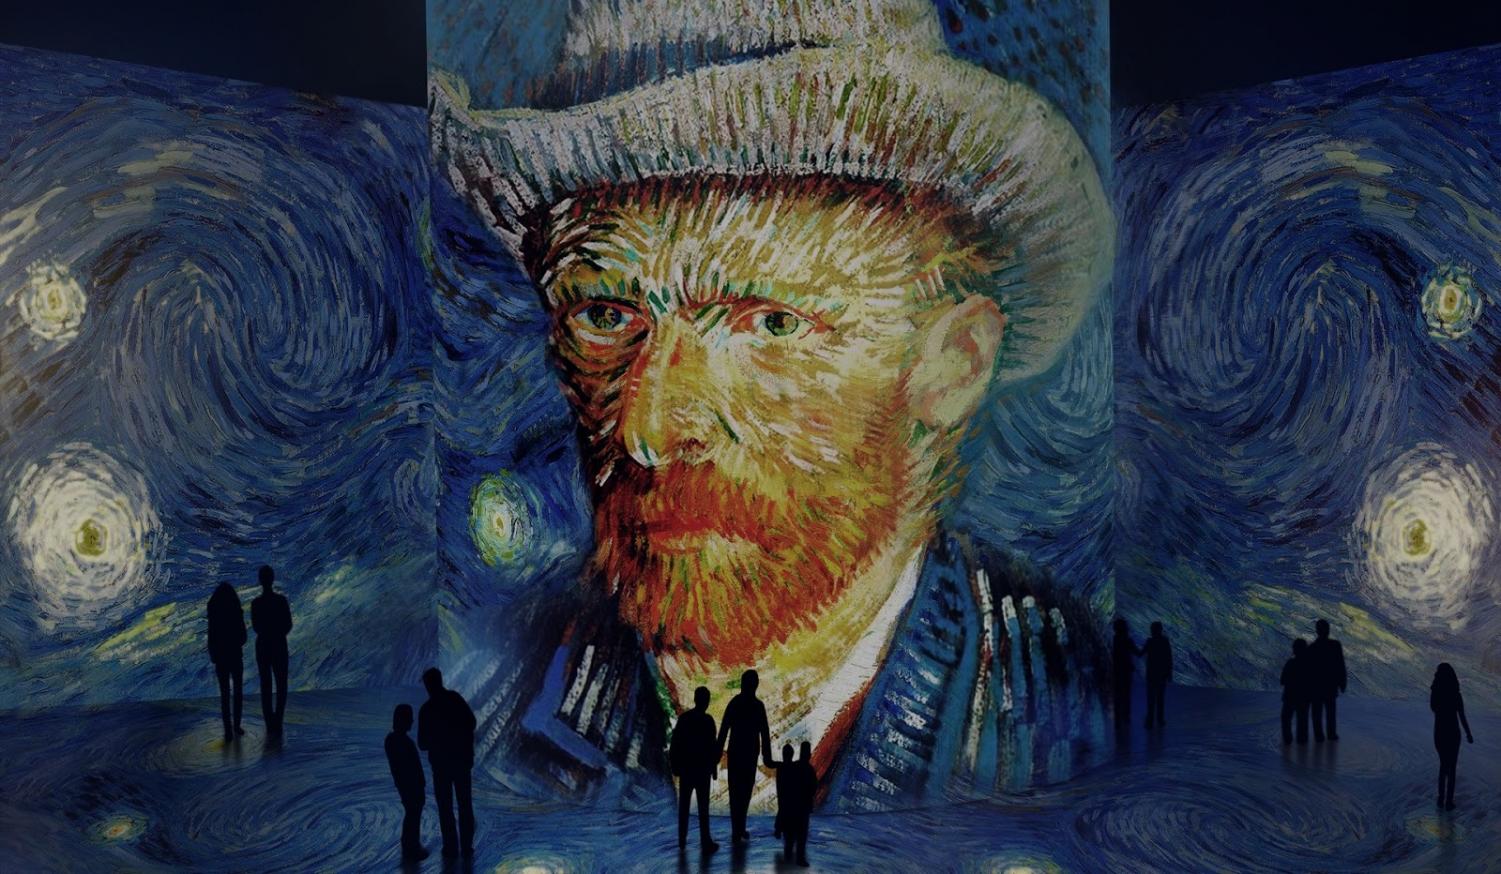 The+Starry+Night+by+Van+Gogh+at+the+Immersive+Van+Gogh+Exhibition+in+Chicago.+The+exhibition+provides+a+deep+dive+into+a+sea+of+colors+and+lights%2C+featuring+60+of+Van+Gogh%E2%80%99s+paintings.